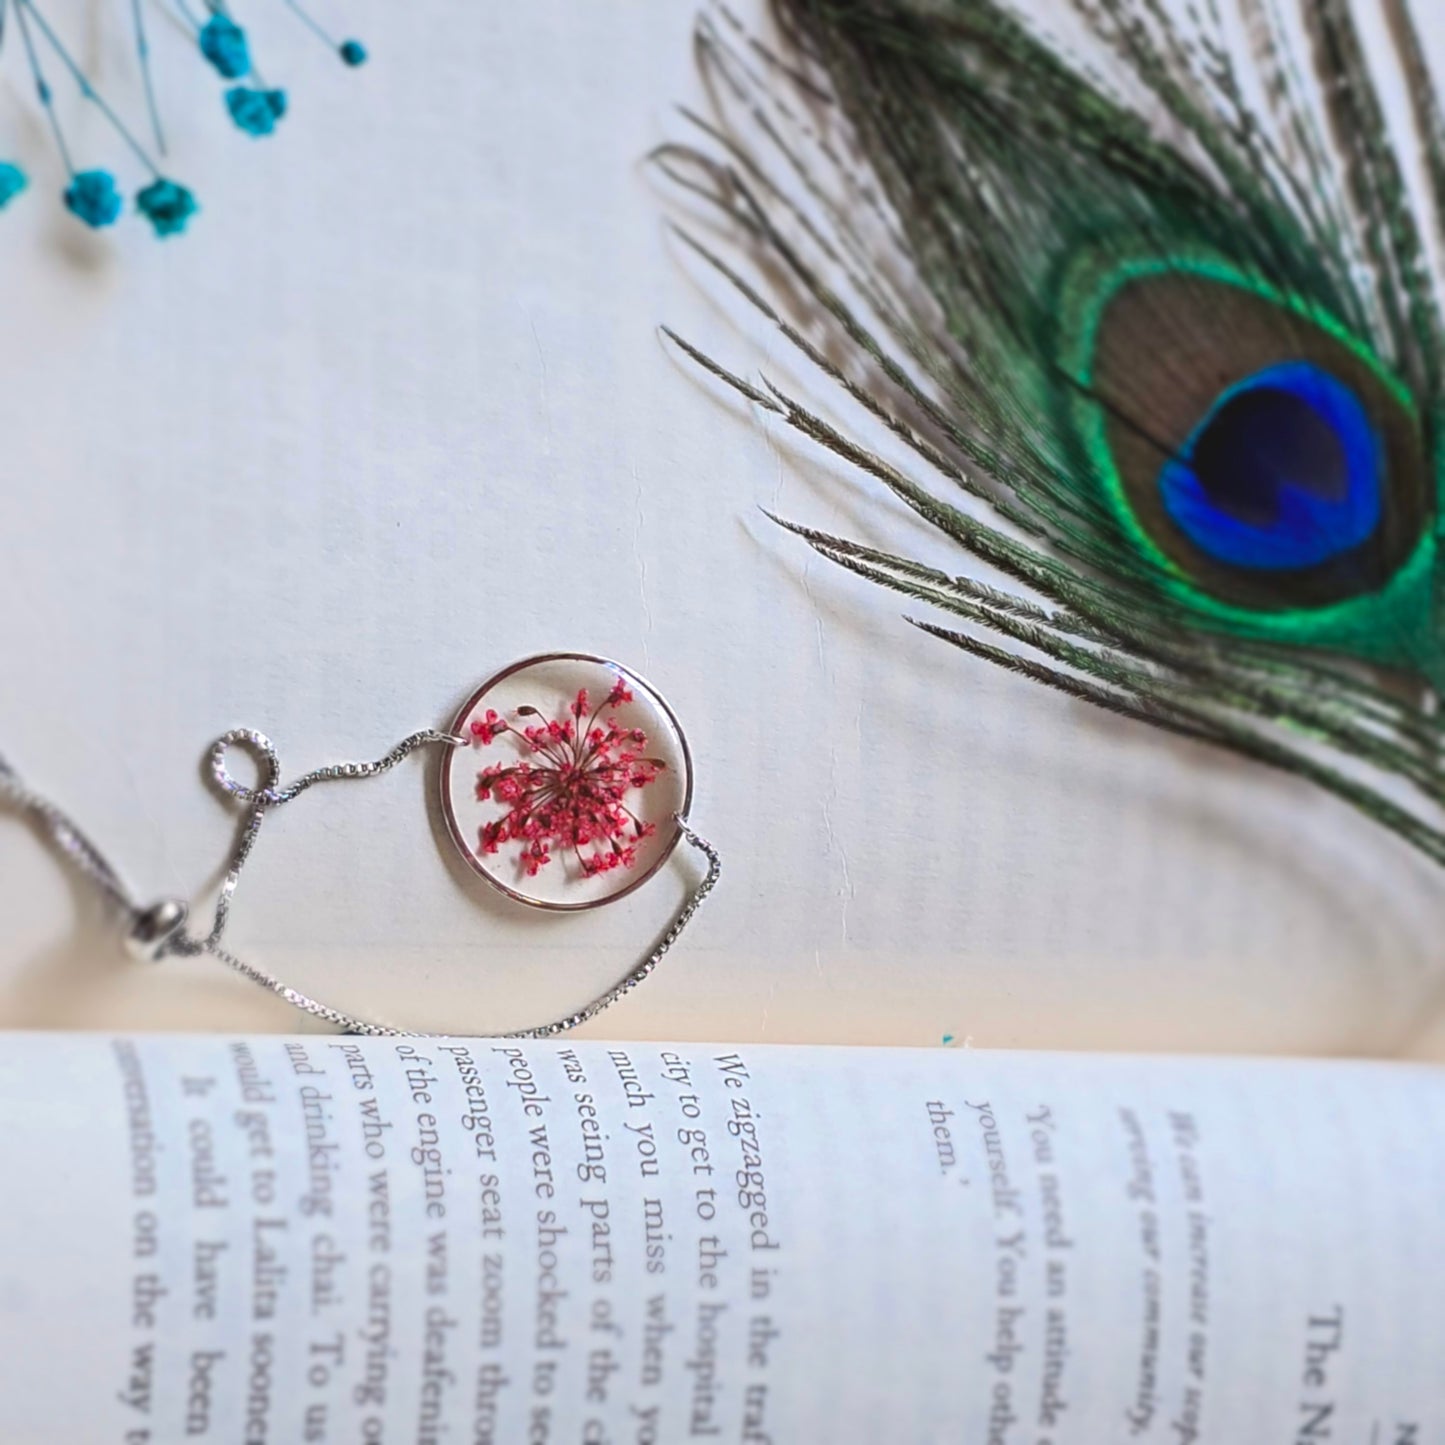 Royal Bloom Resin Bracelet: Queen Anne's Lace in Red